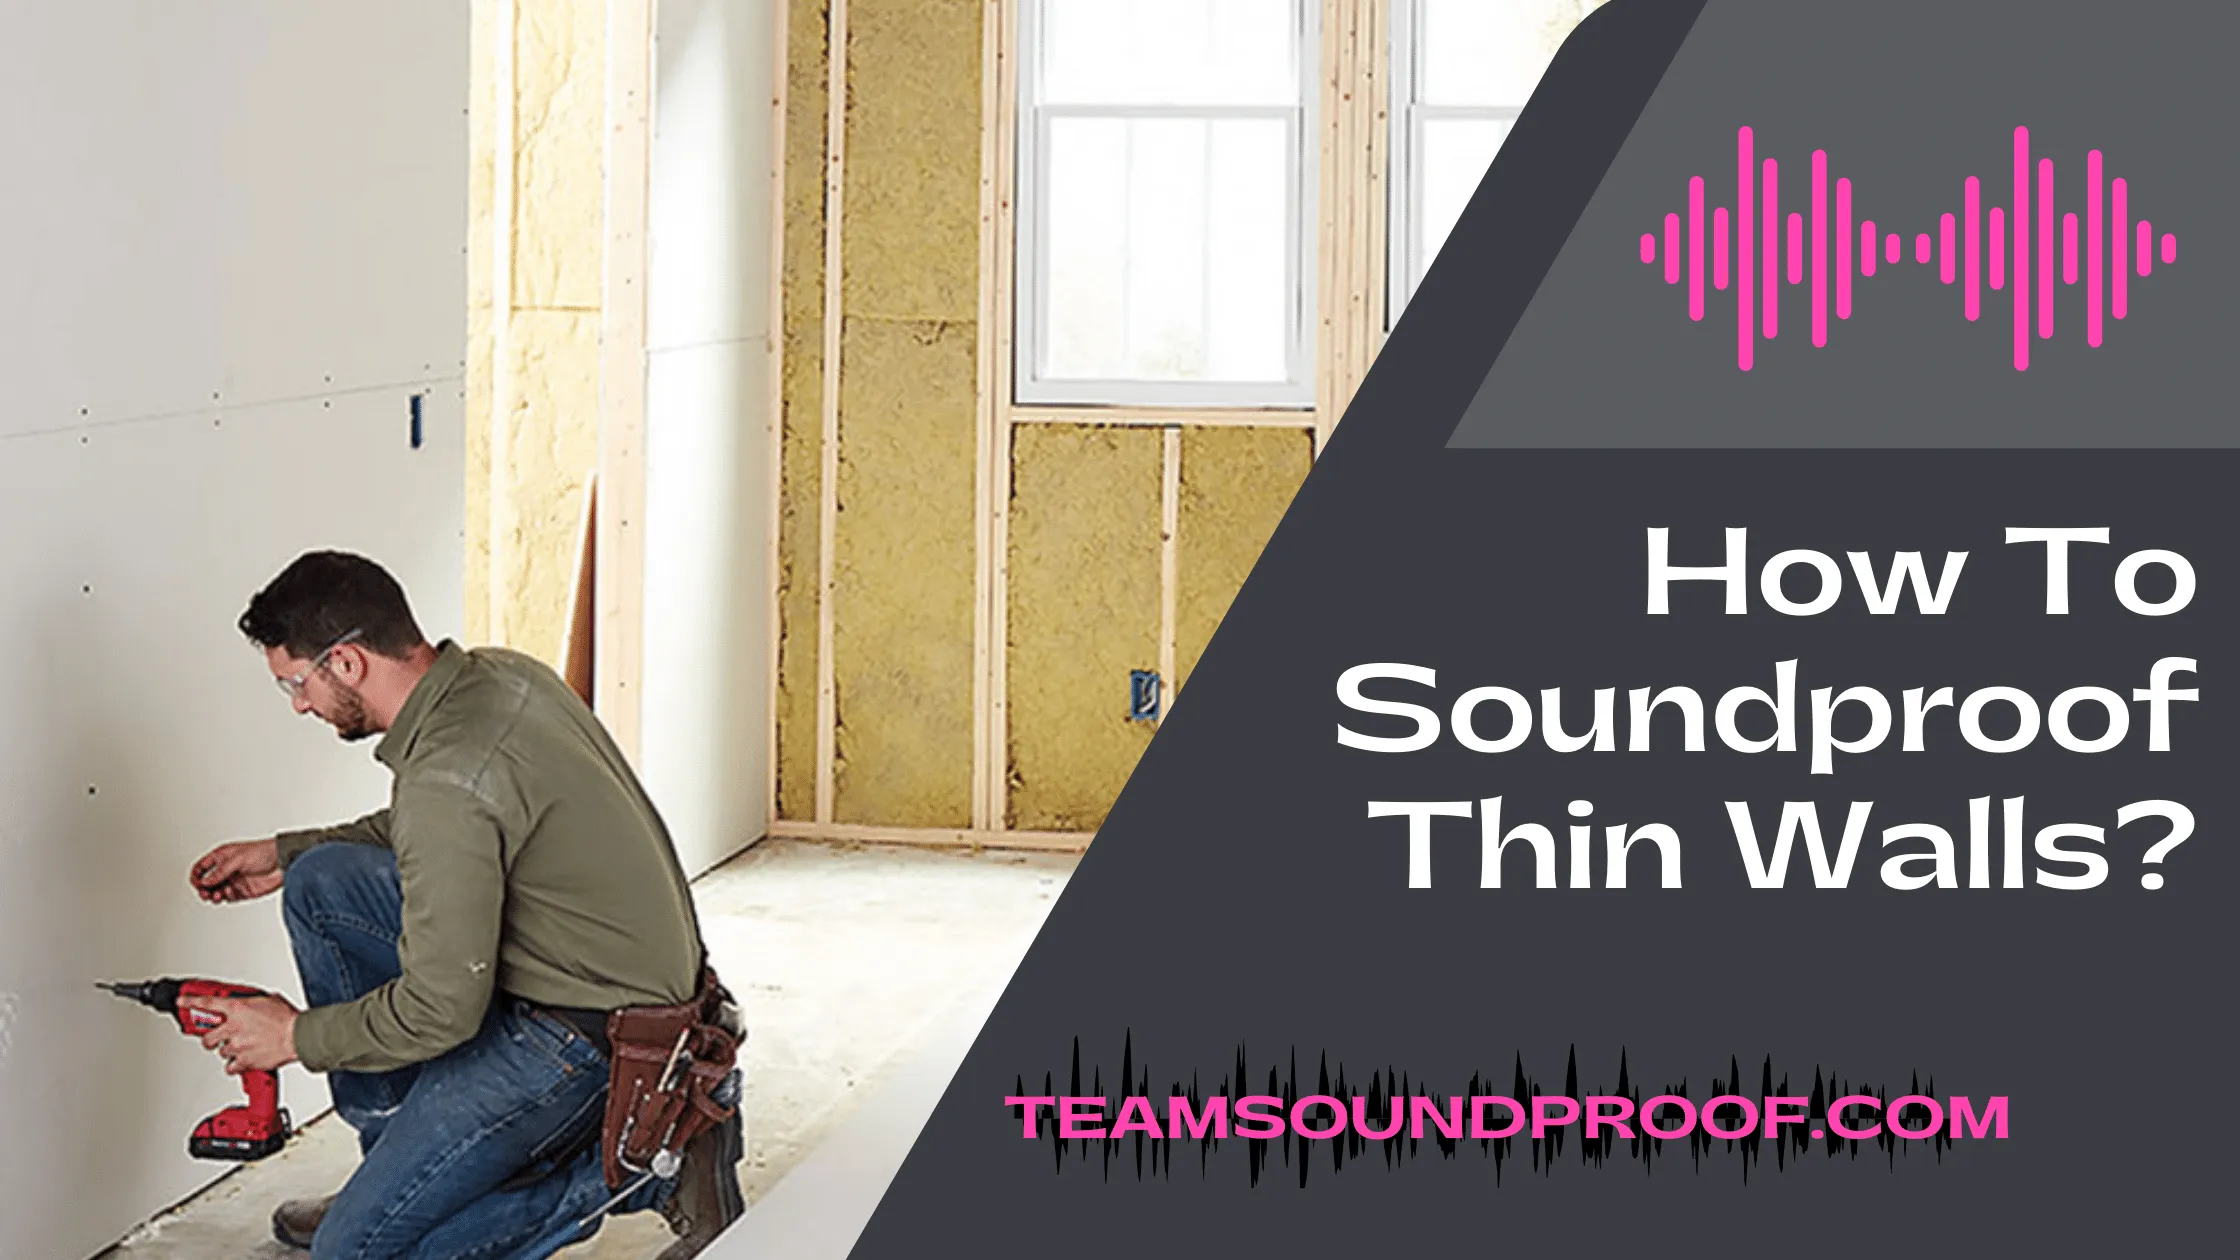 How To Soundproof Thin Walls? - #1 Solution